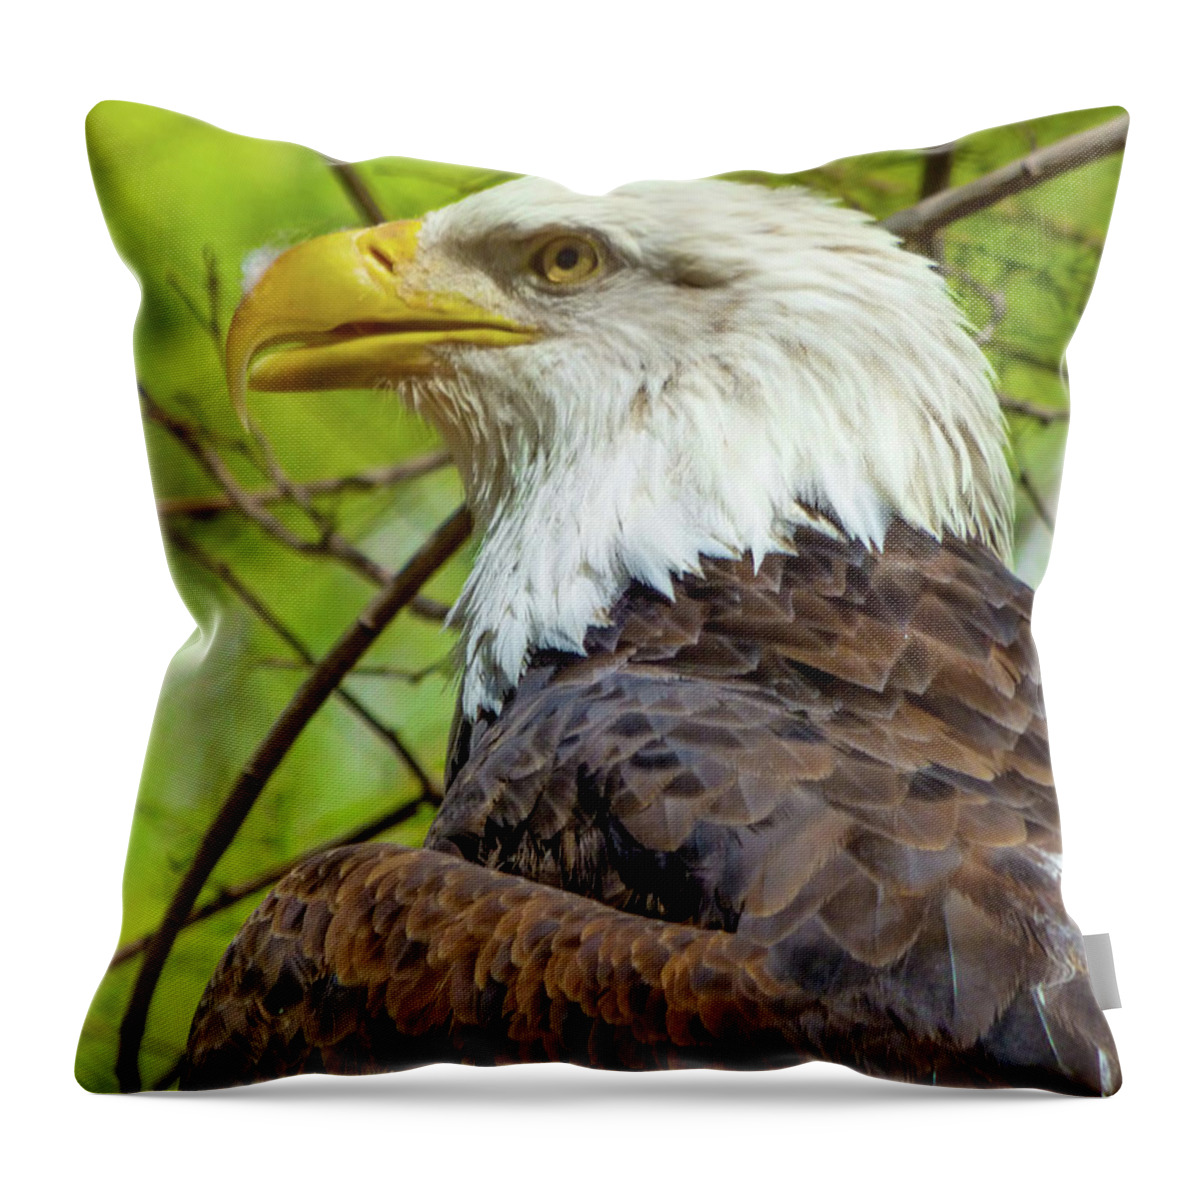 Orcinusfotograffy Throw Pillow featuring the photograph Grounded by Kimo Fernandez